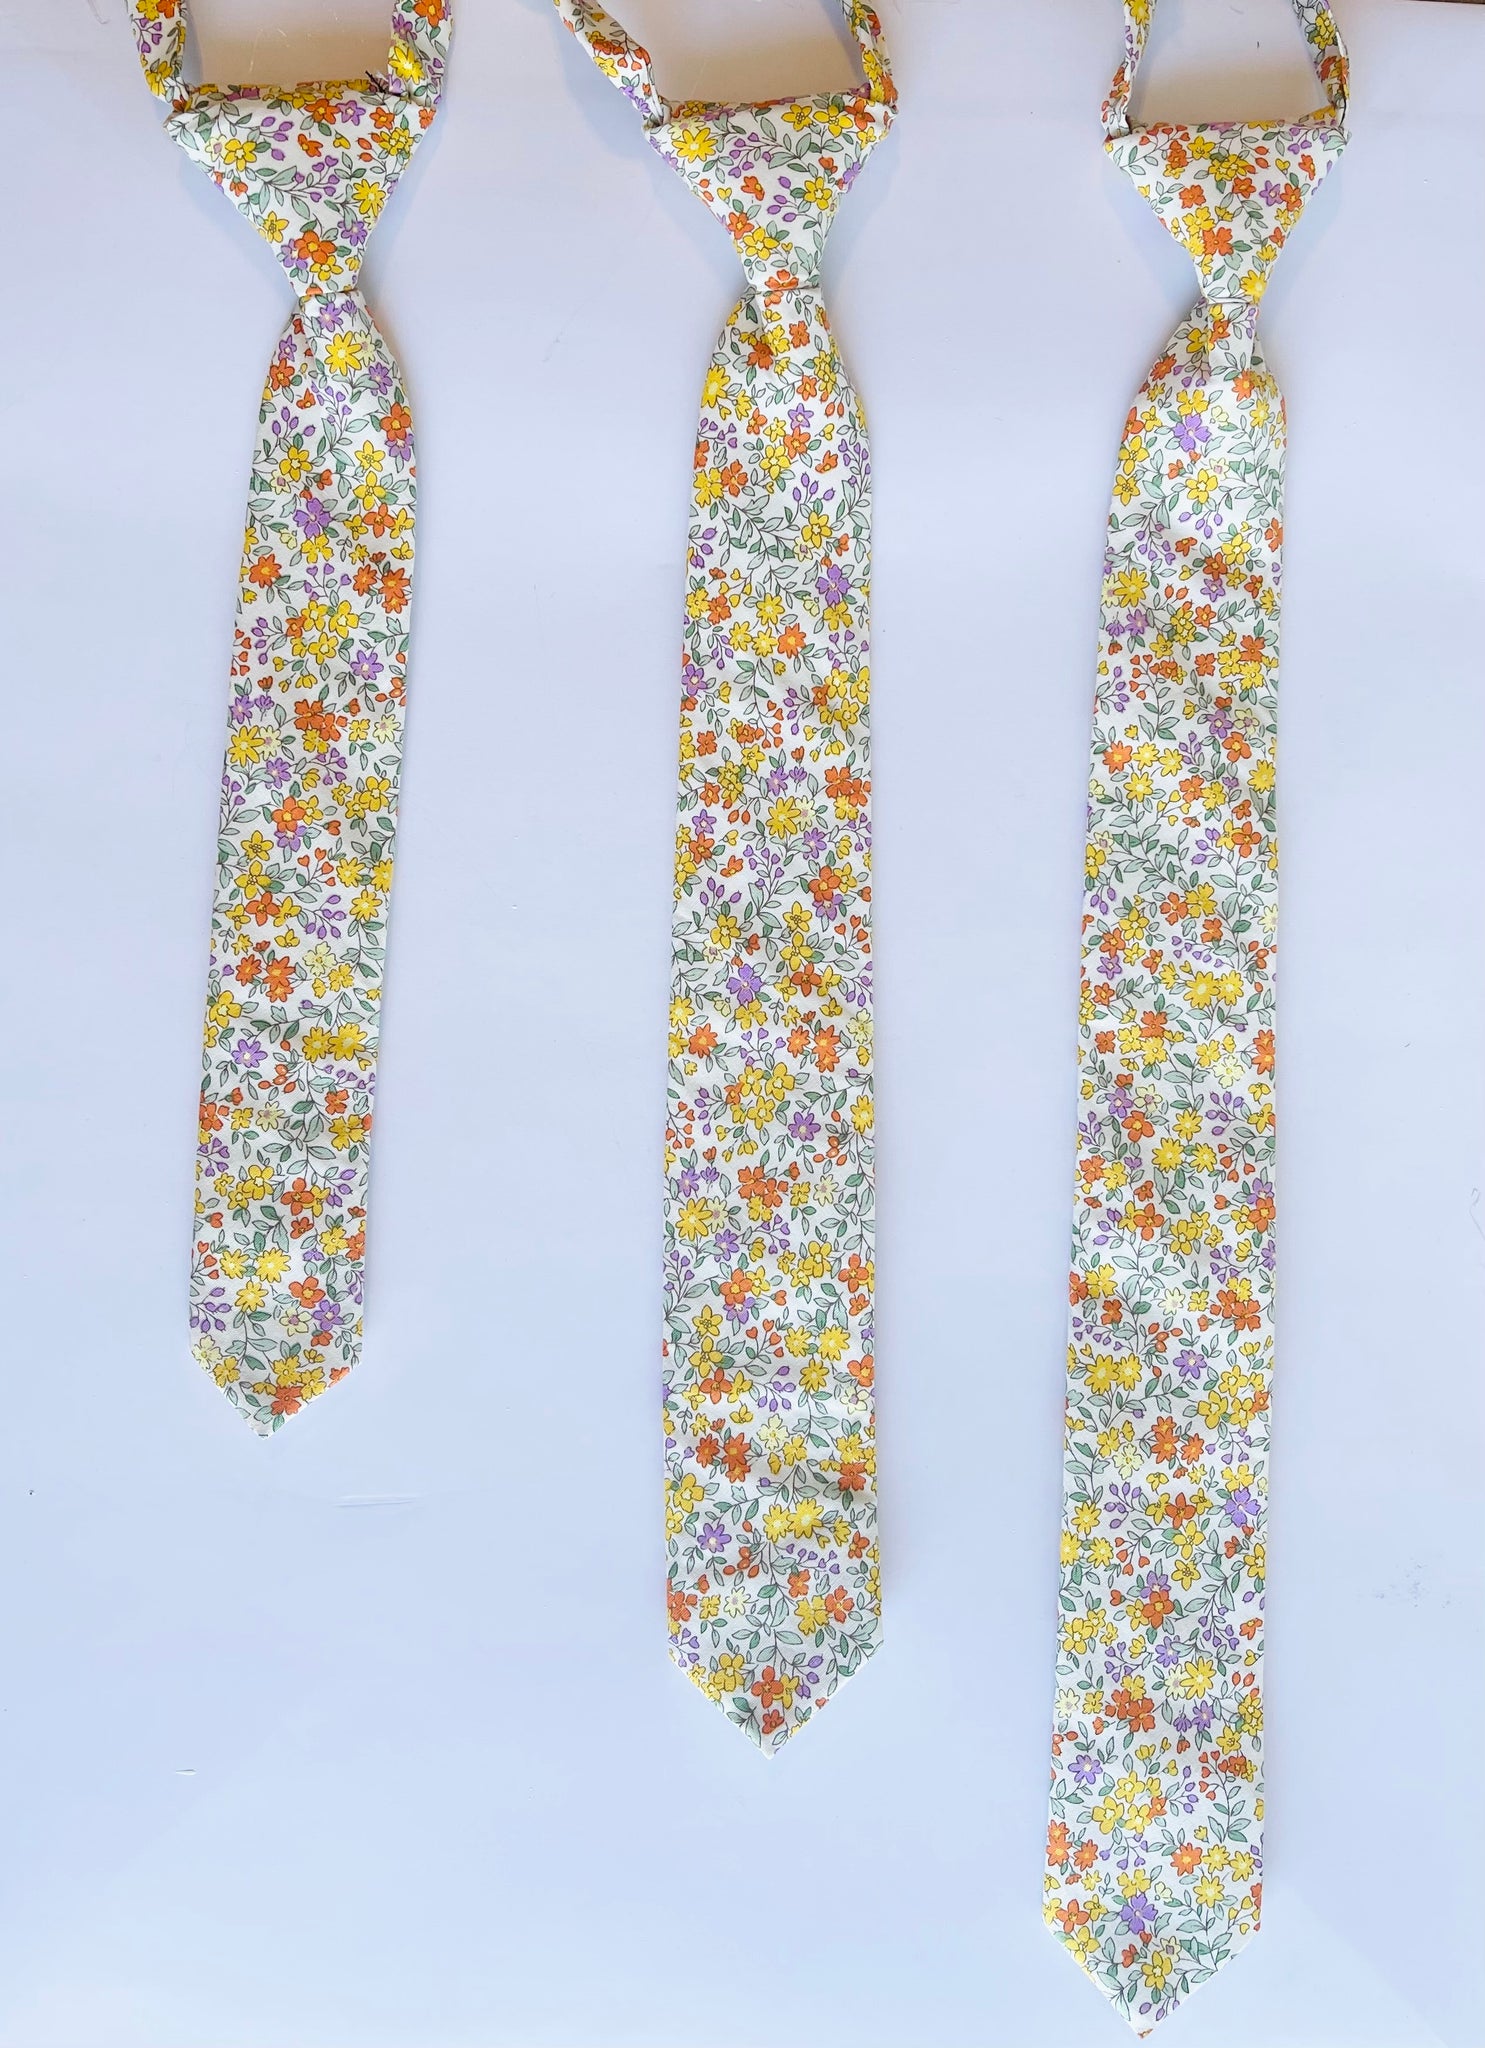 YELLOW FLORAL Tie -(Small, Medium, Large, ADULT)